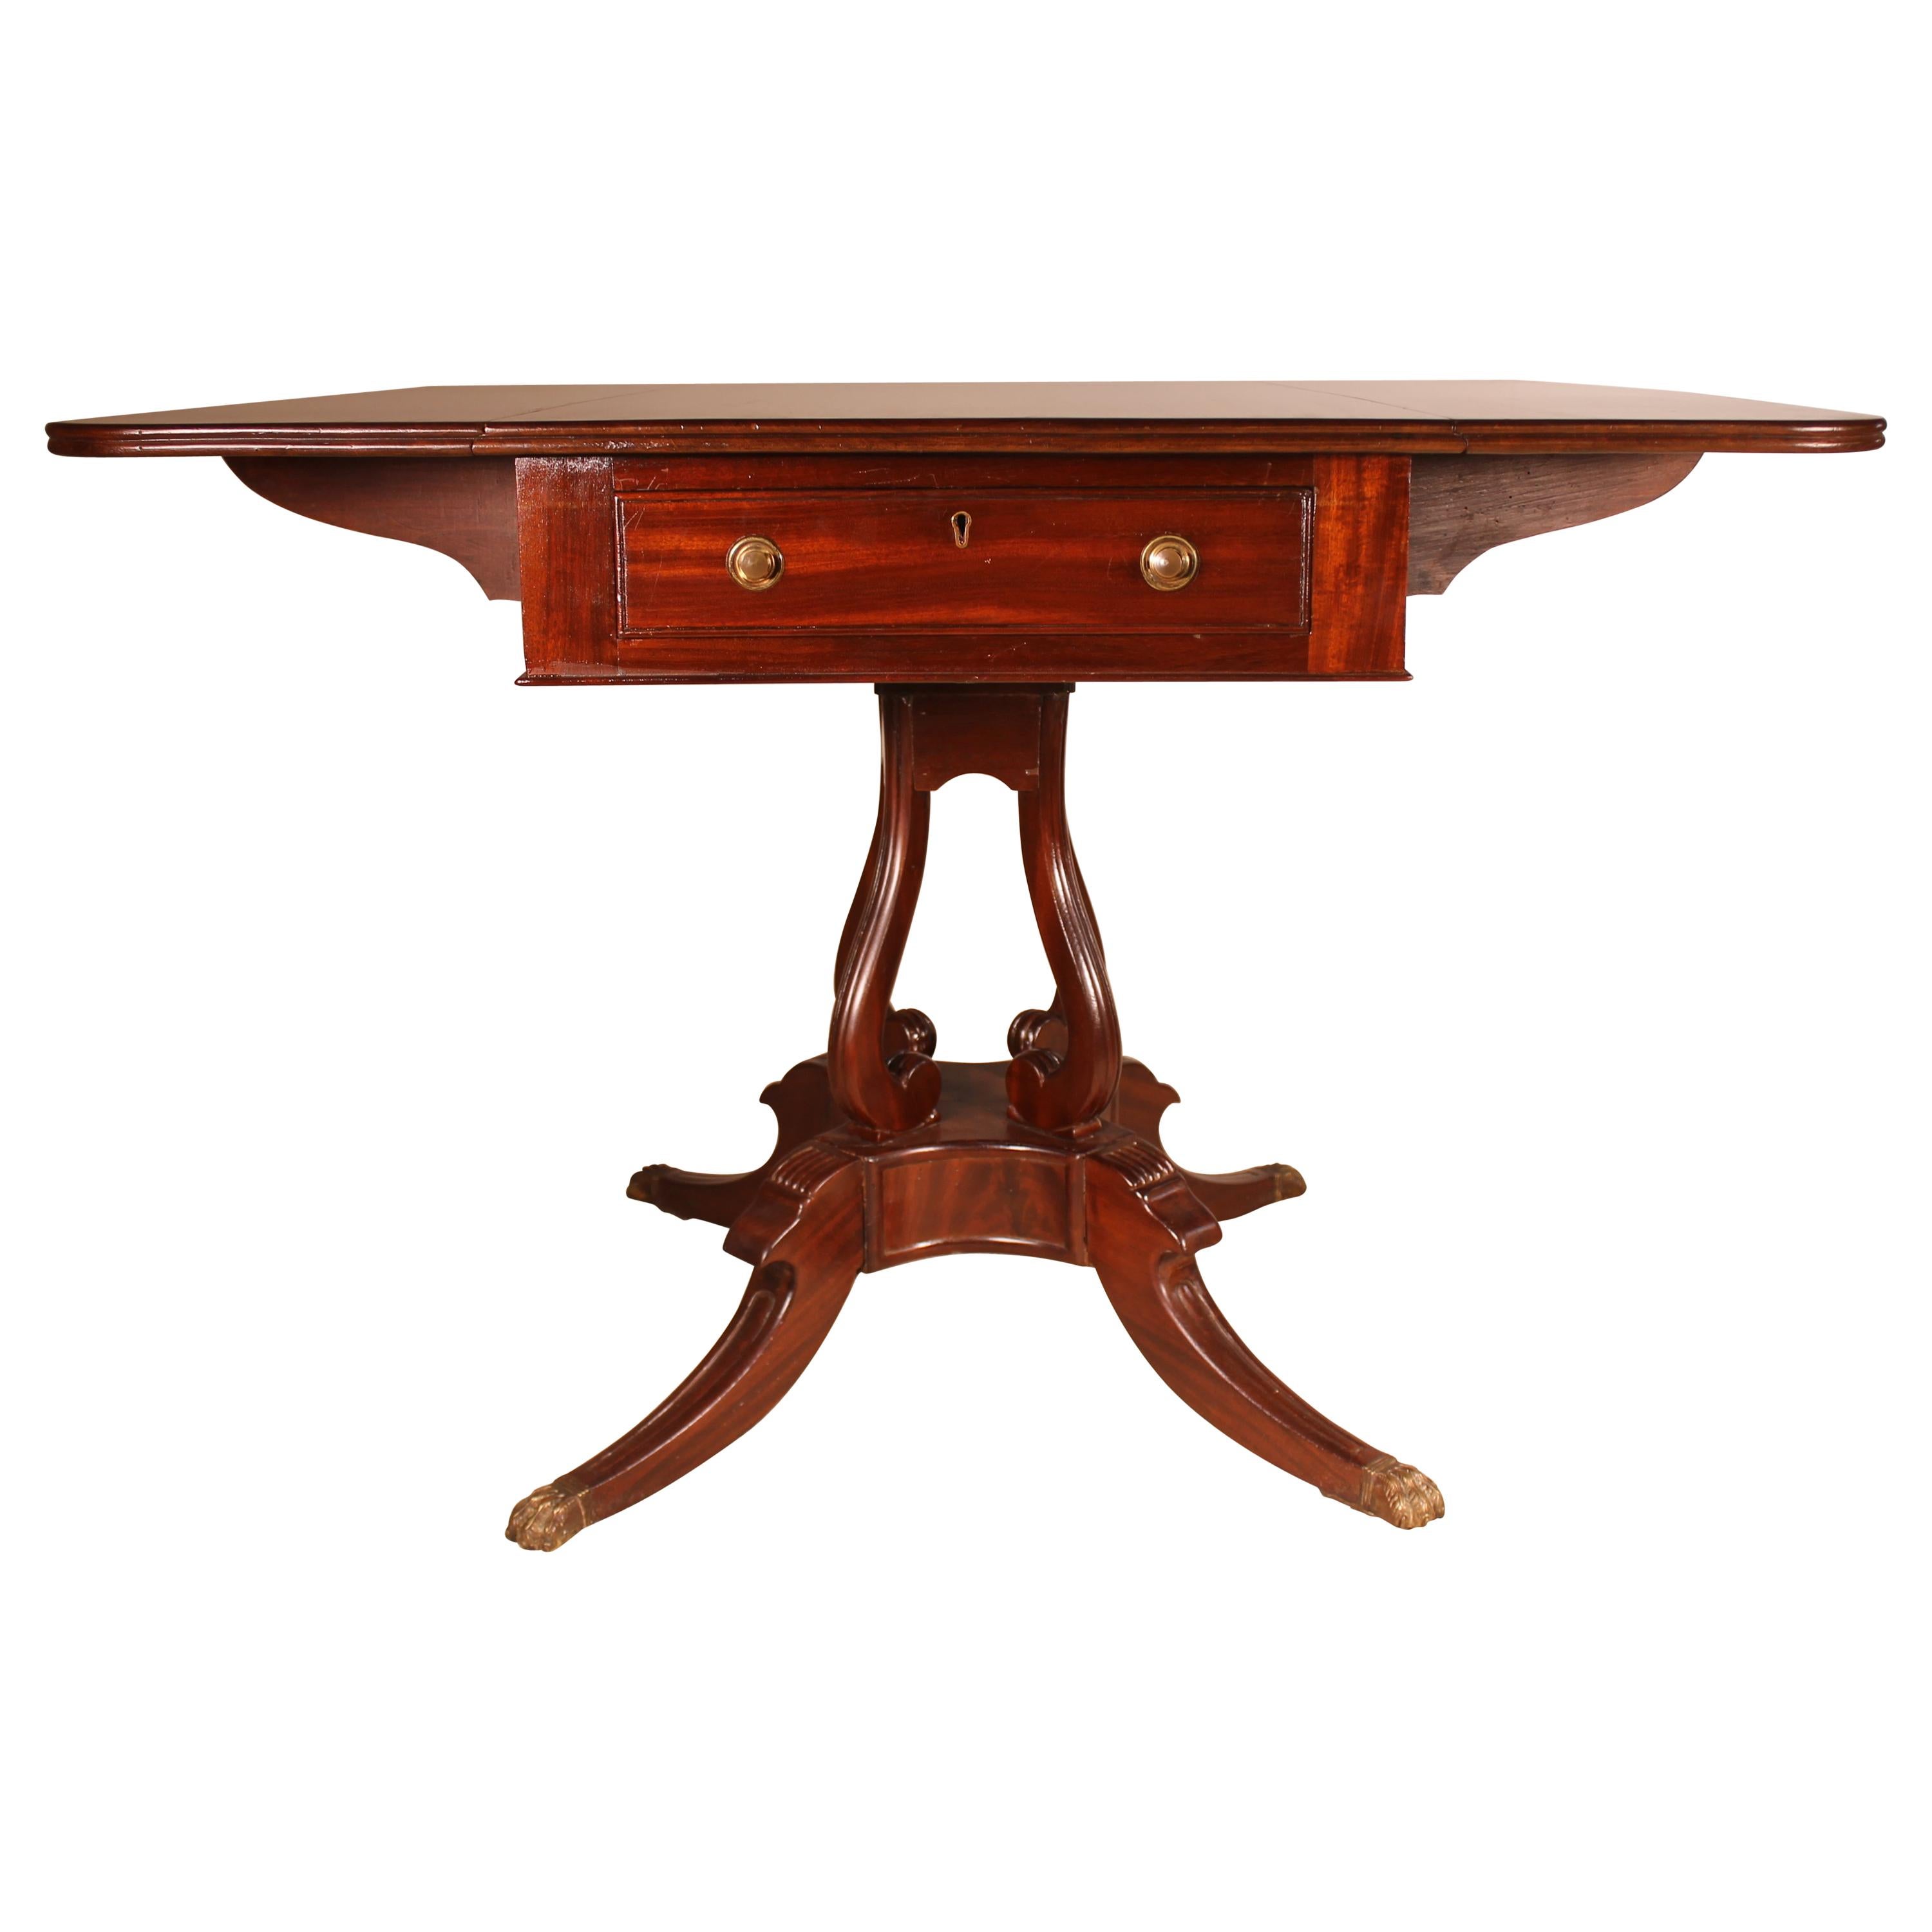 Fine Regency Drum Table or Card Table in Mahogany